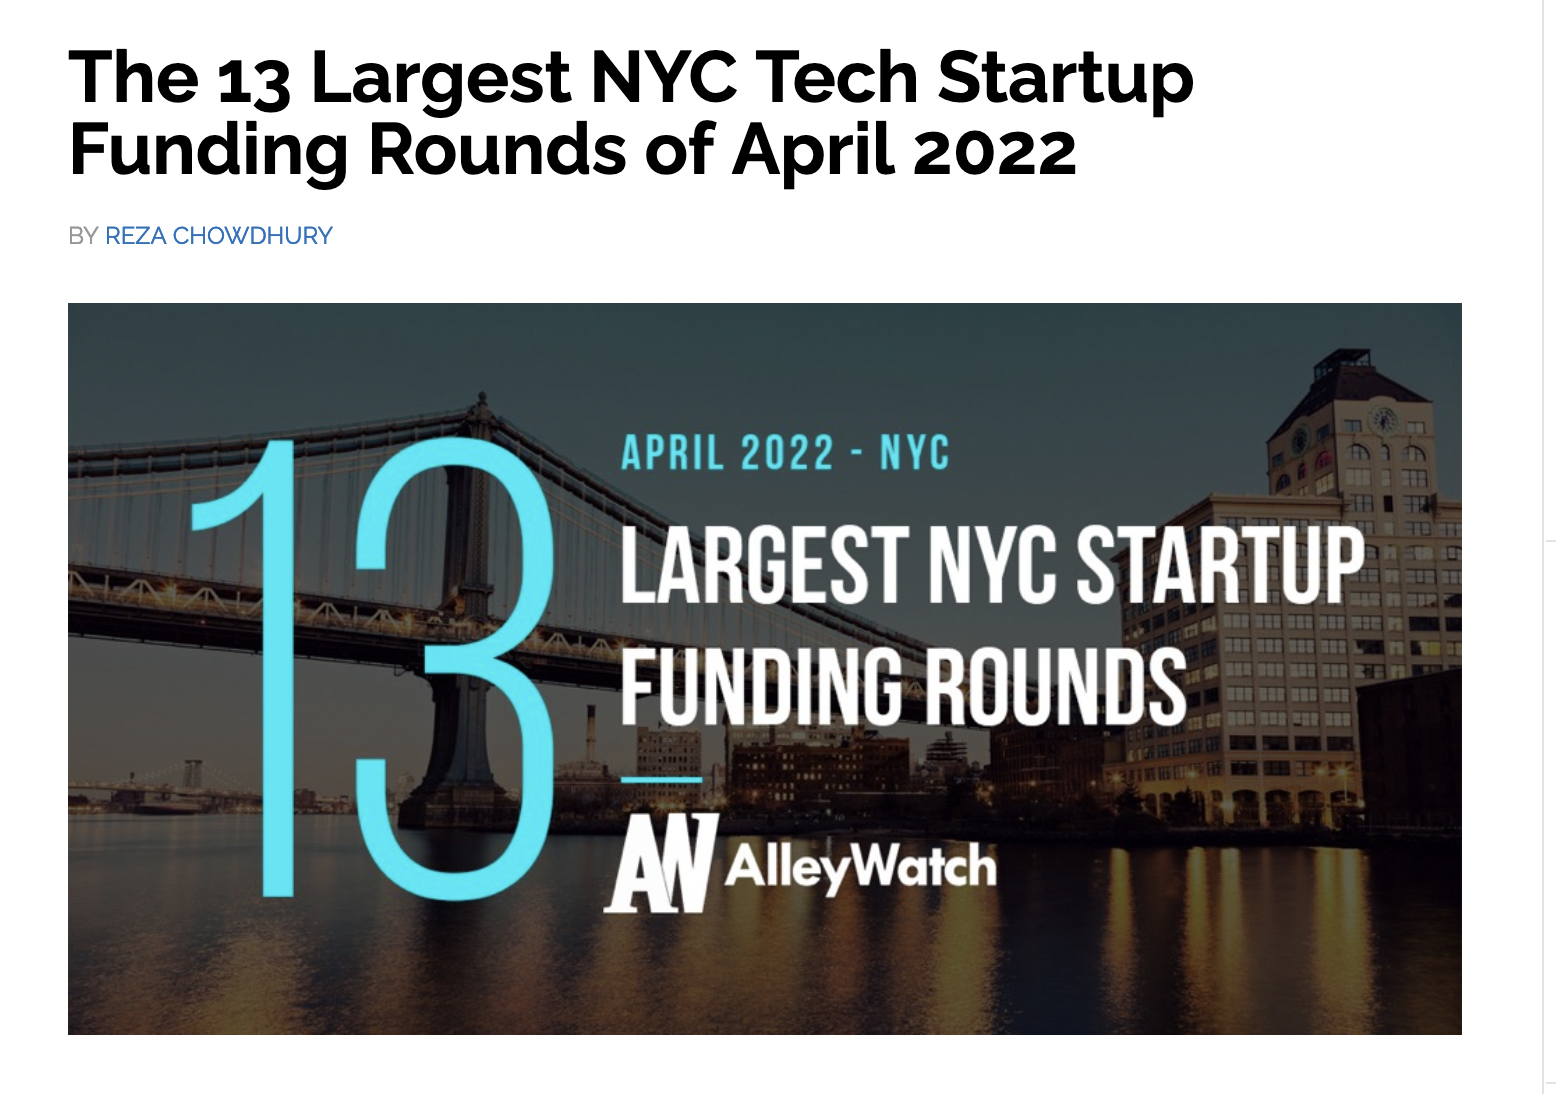 The 13 Largest NYC Tech Startup Funding Rounds of April 2022